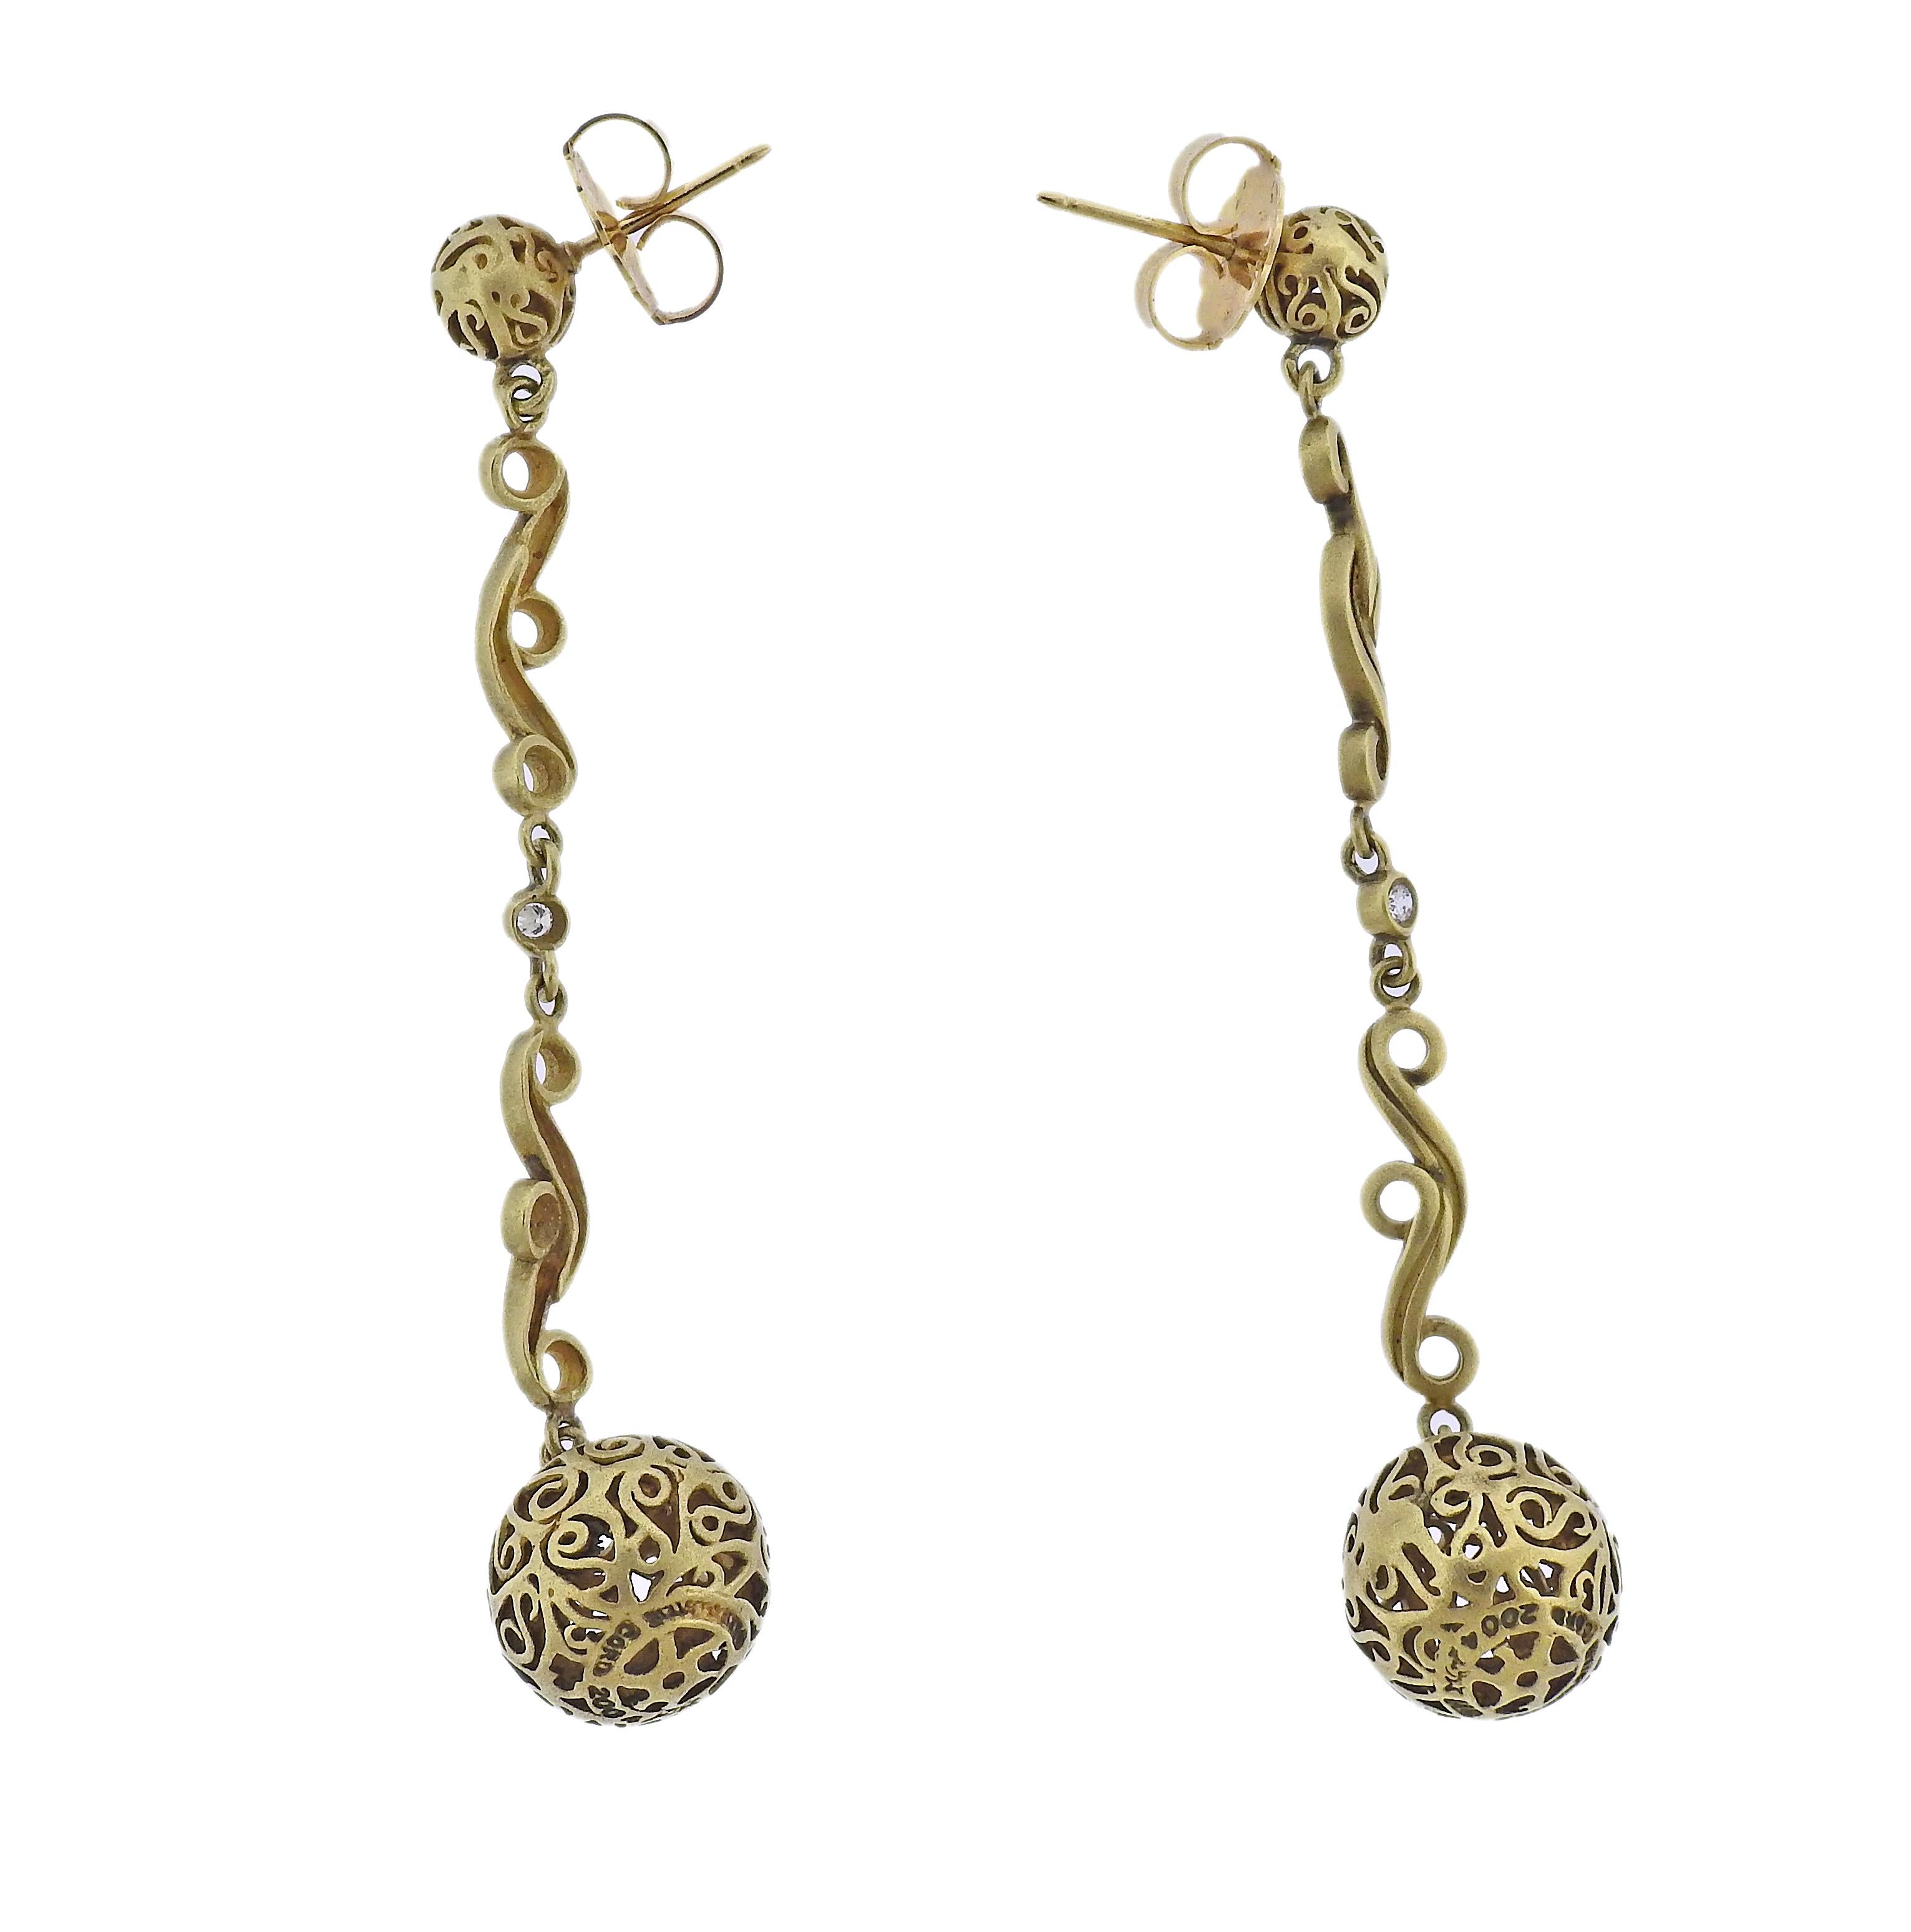 Circa 2004, pair of long 18k gold ball drop earrings by Kieselstein Cord, with approx. 0.10ctw H/VS diamonds. Earrings are 3